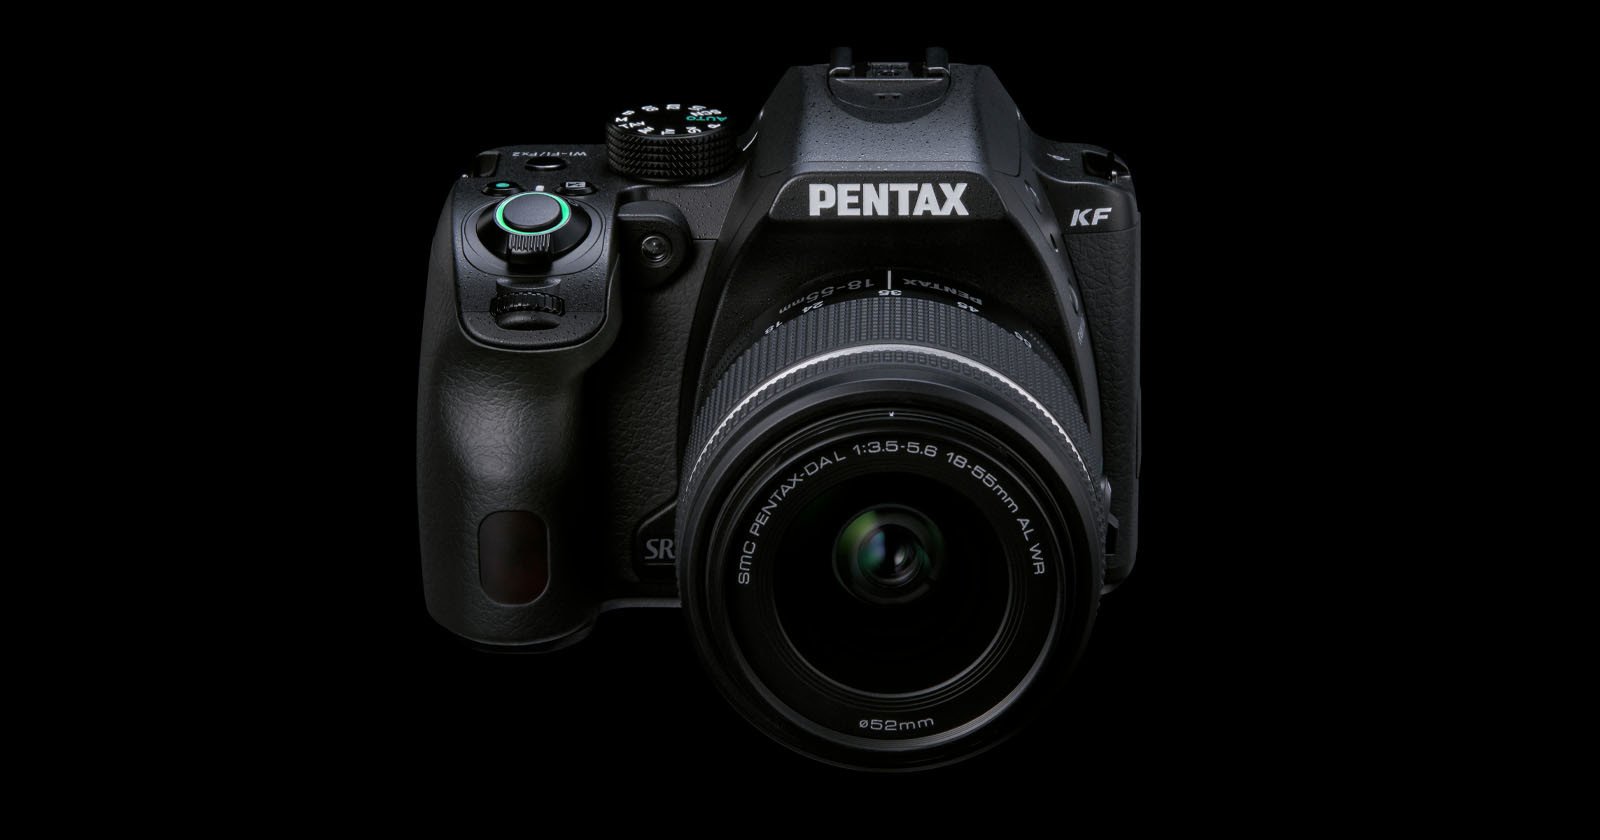  ricoh pentax dslr largely unchanged k-70 re-release 